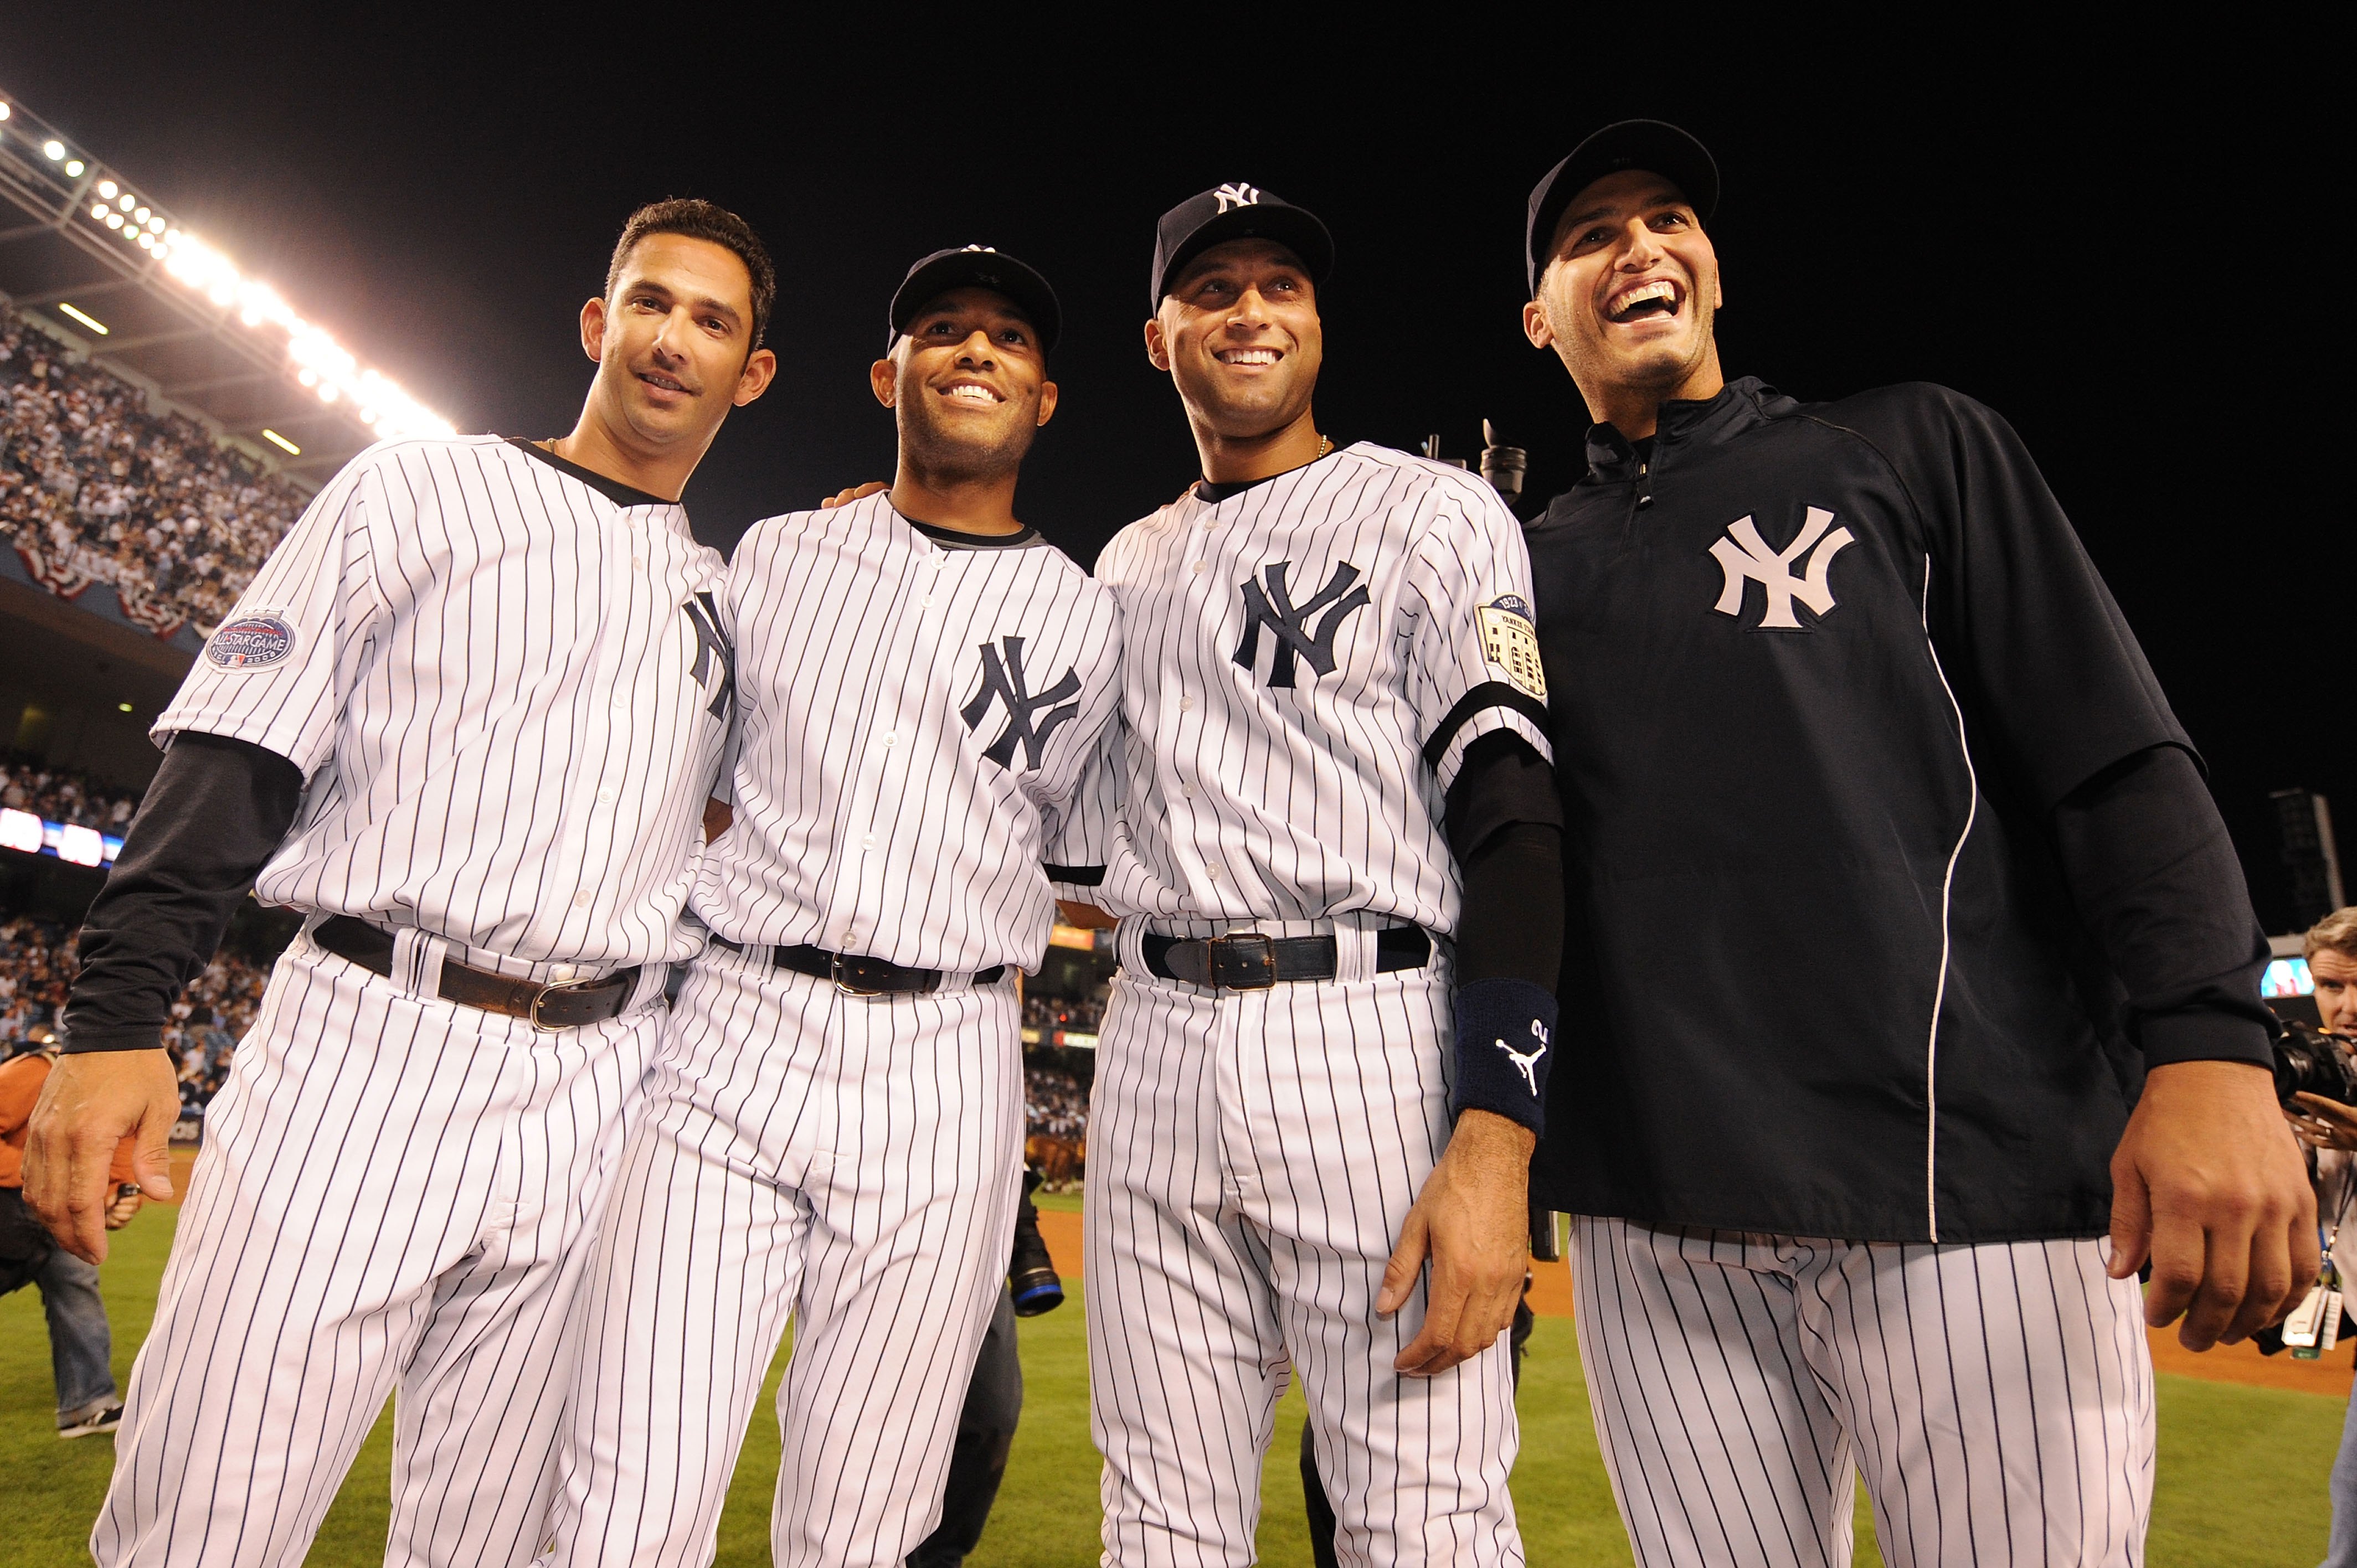 Mariano Rivera New York Yankees Hall Of Fame Pitcher 8x10 Photo Picture As  He Is Relieved By Derek Jeter, and Andy Pettitte